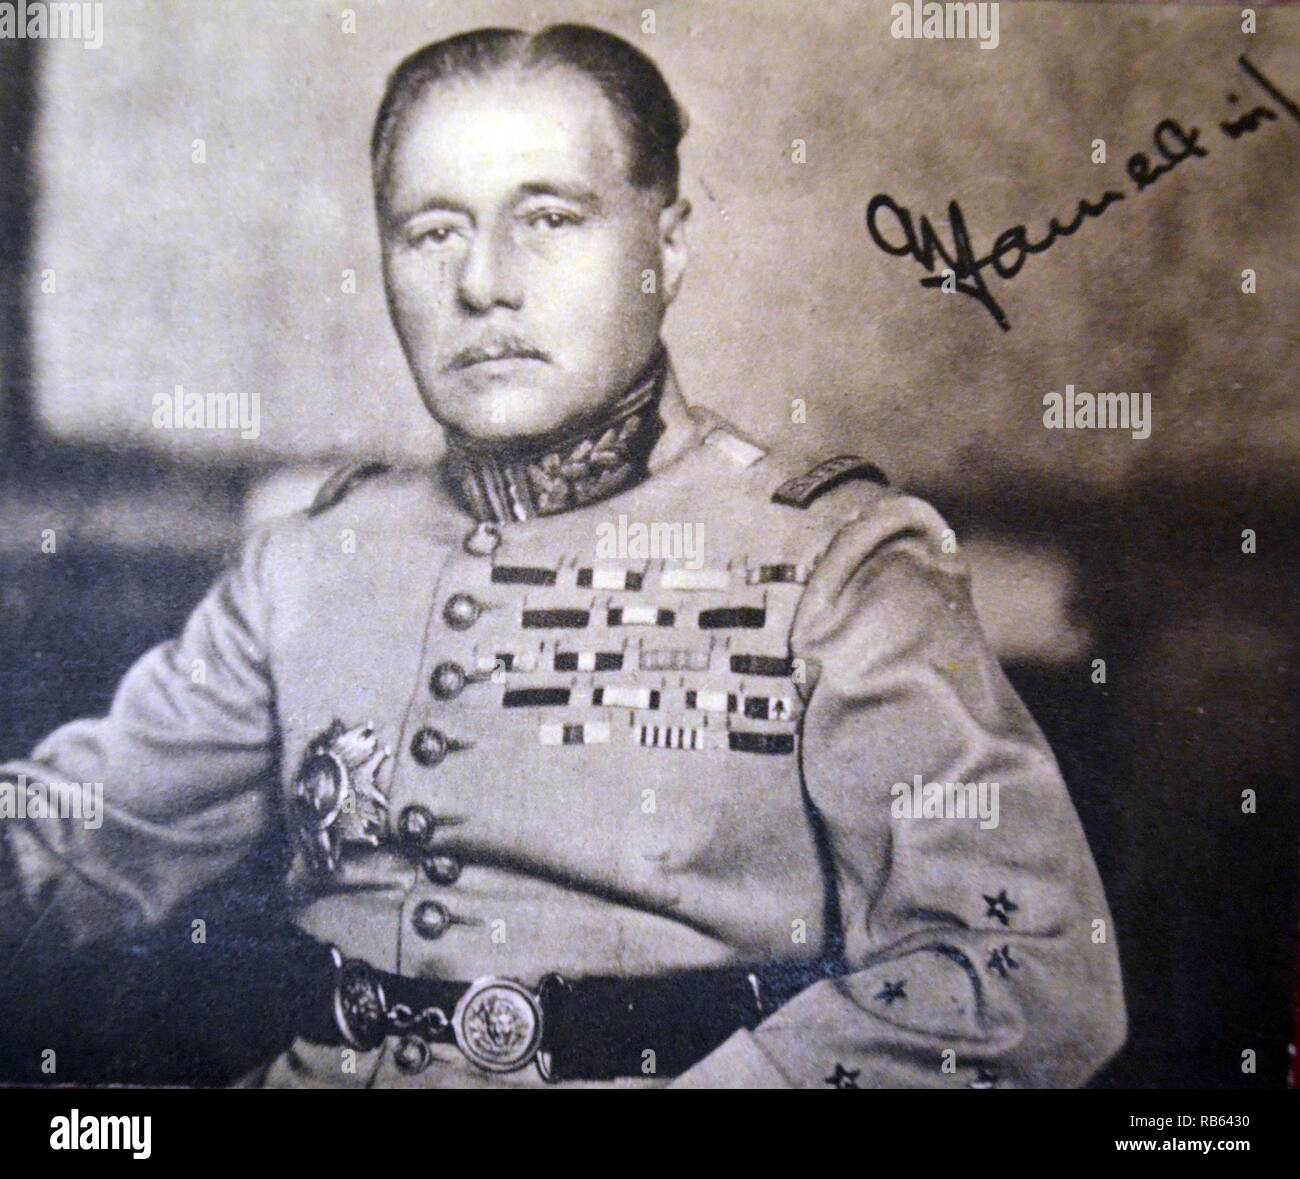 Maurice Gustave Gamelan (20 September 1872 - 18 April 1958) was a French general. Gamelan is remembered for his unsuccessful command of the French military in 1940 during the Battle of France and his steadfast defence of republican values. Stock Photo